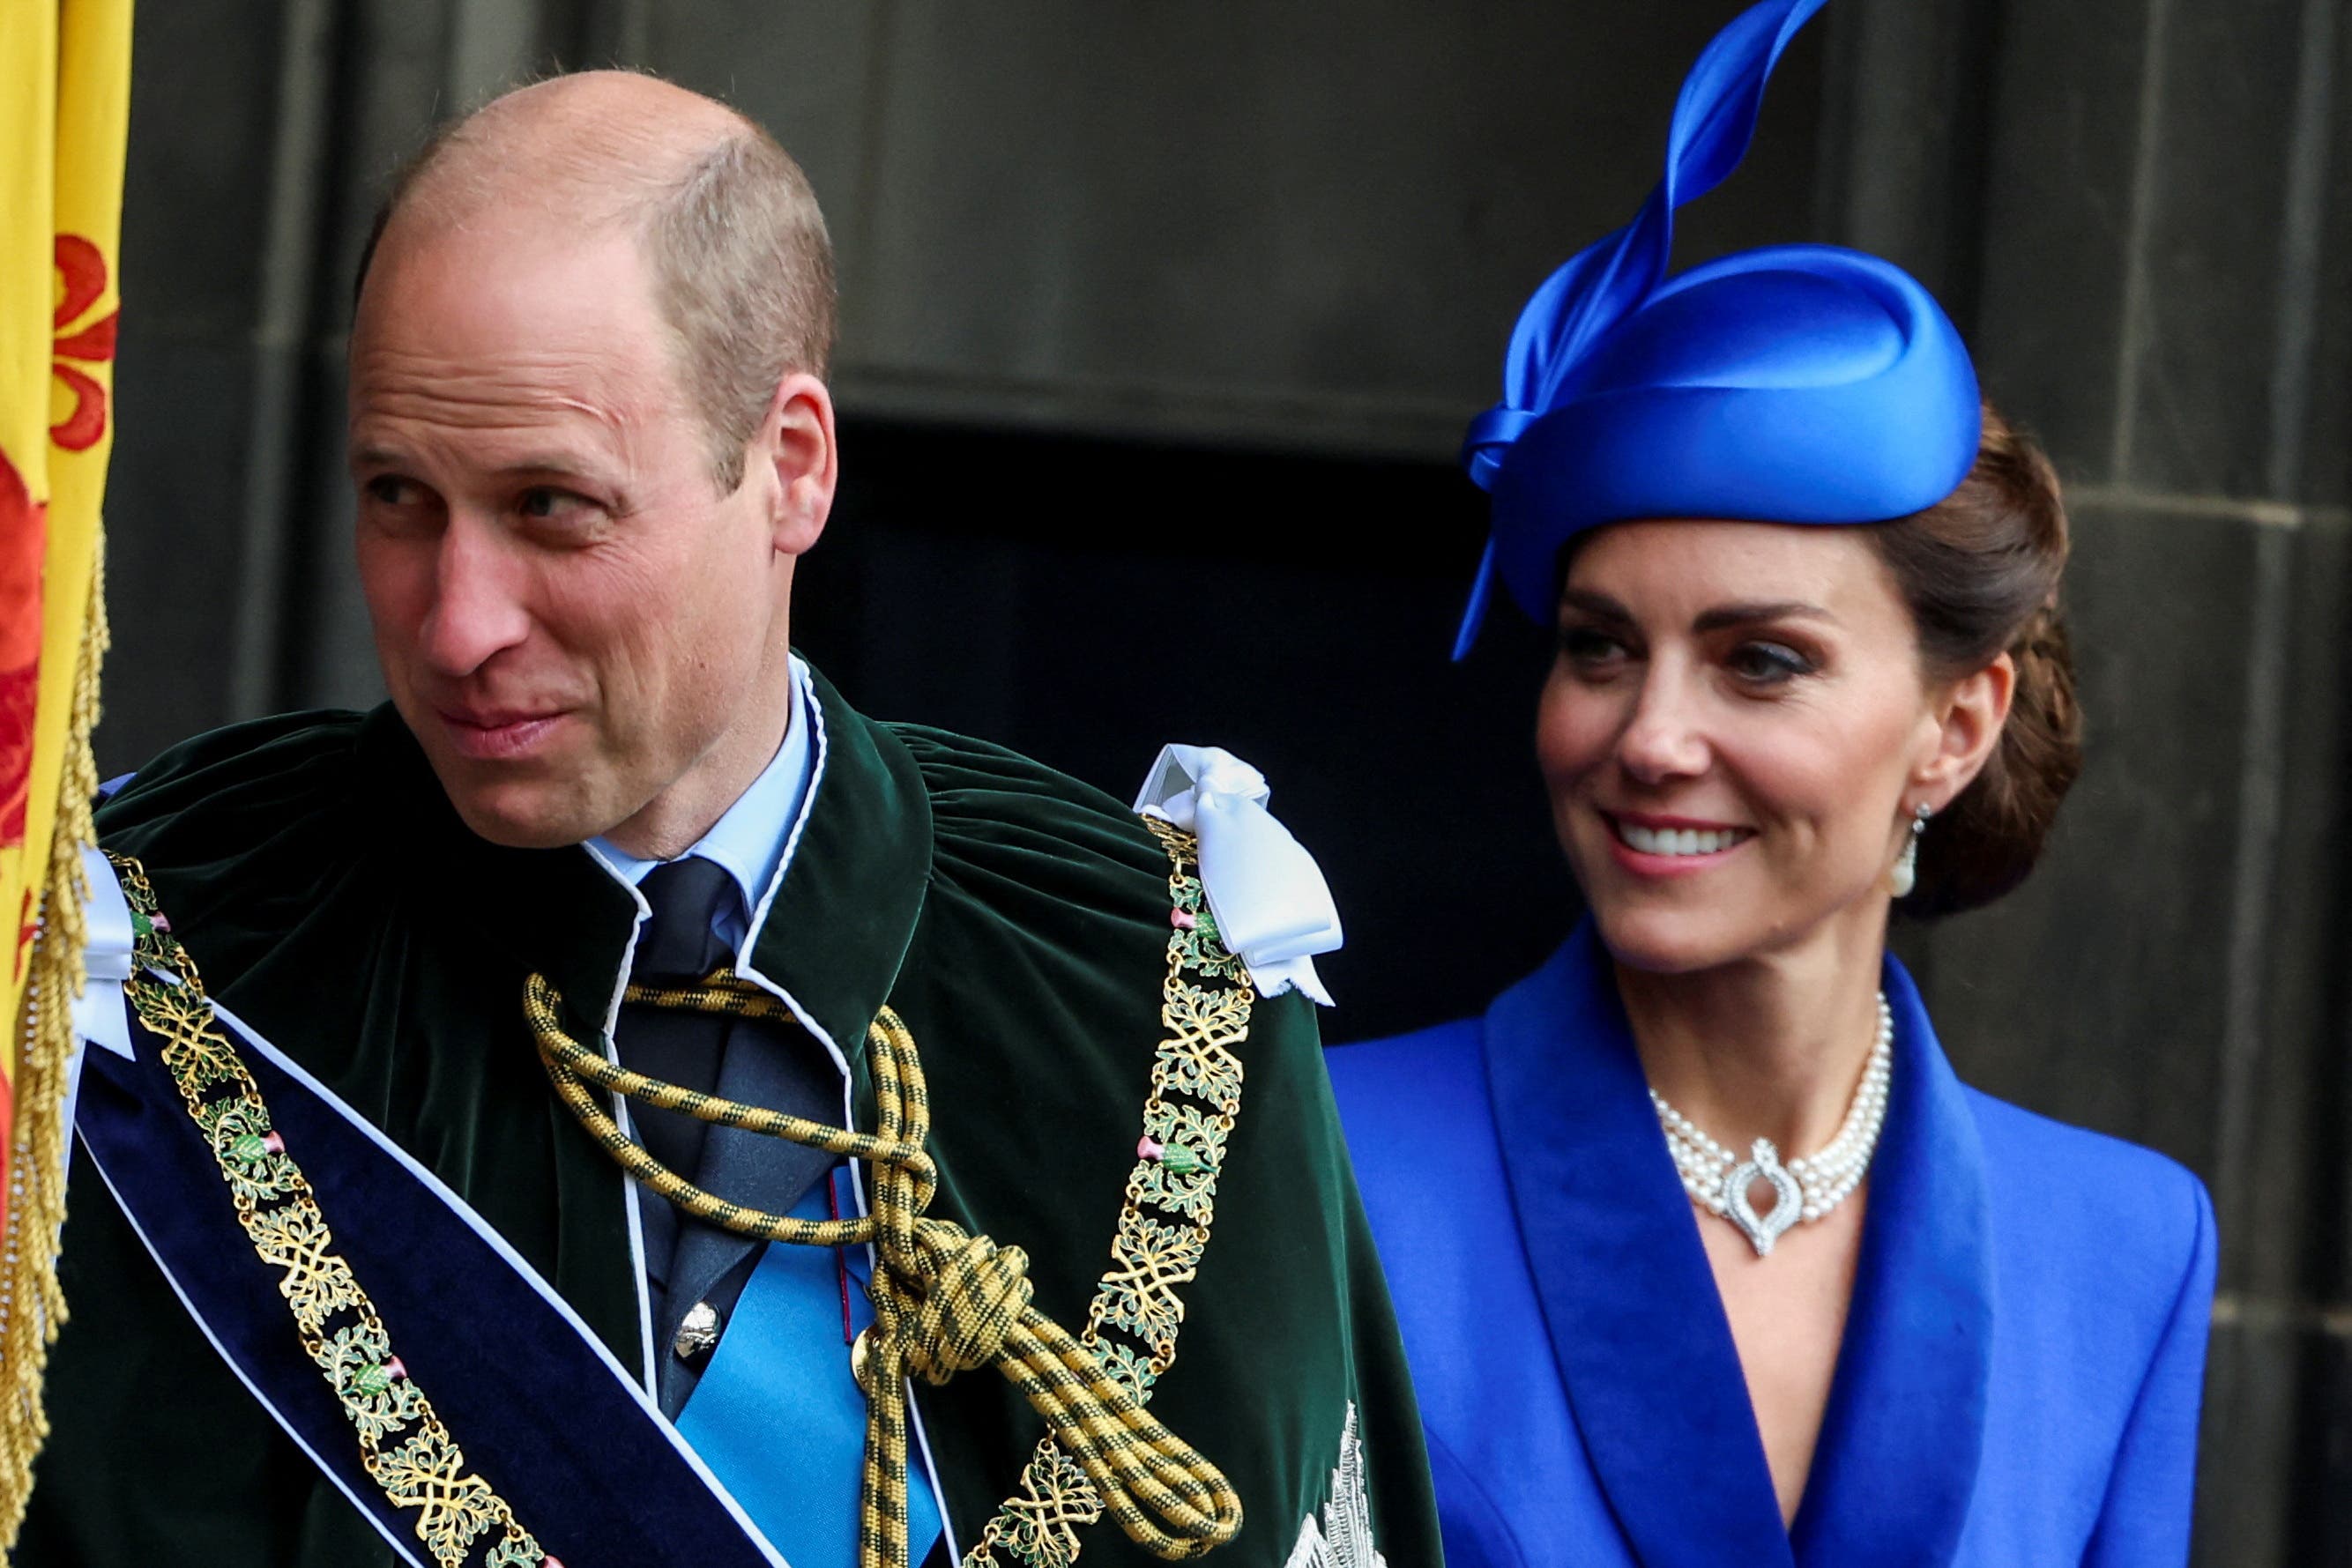 The Prince and Princess of Wales have been invited to the Duke of Westminster’s wedding